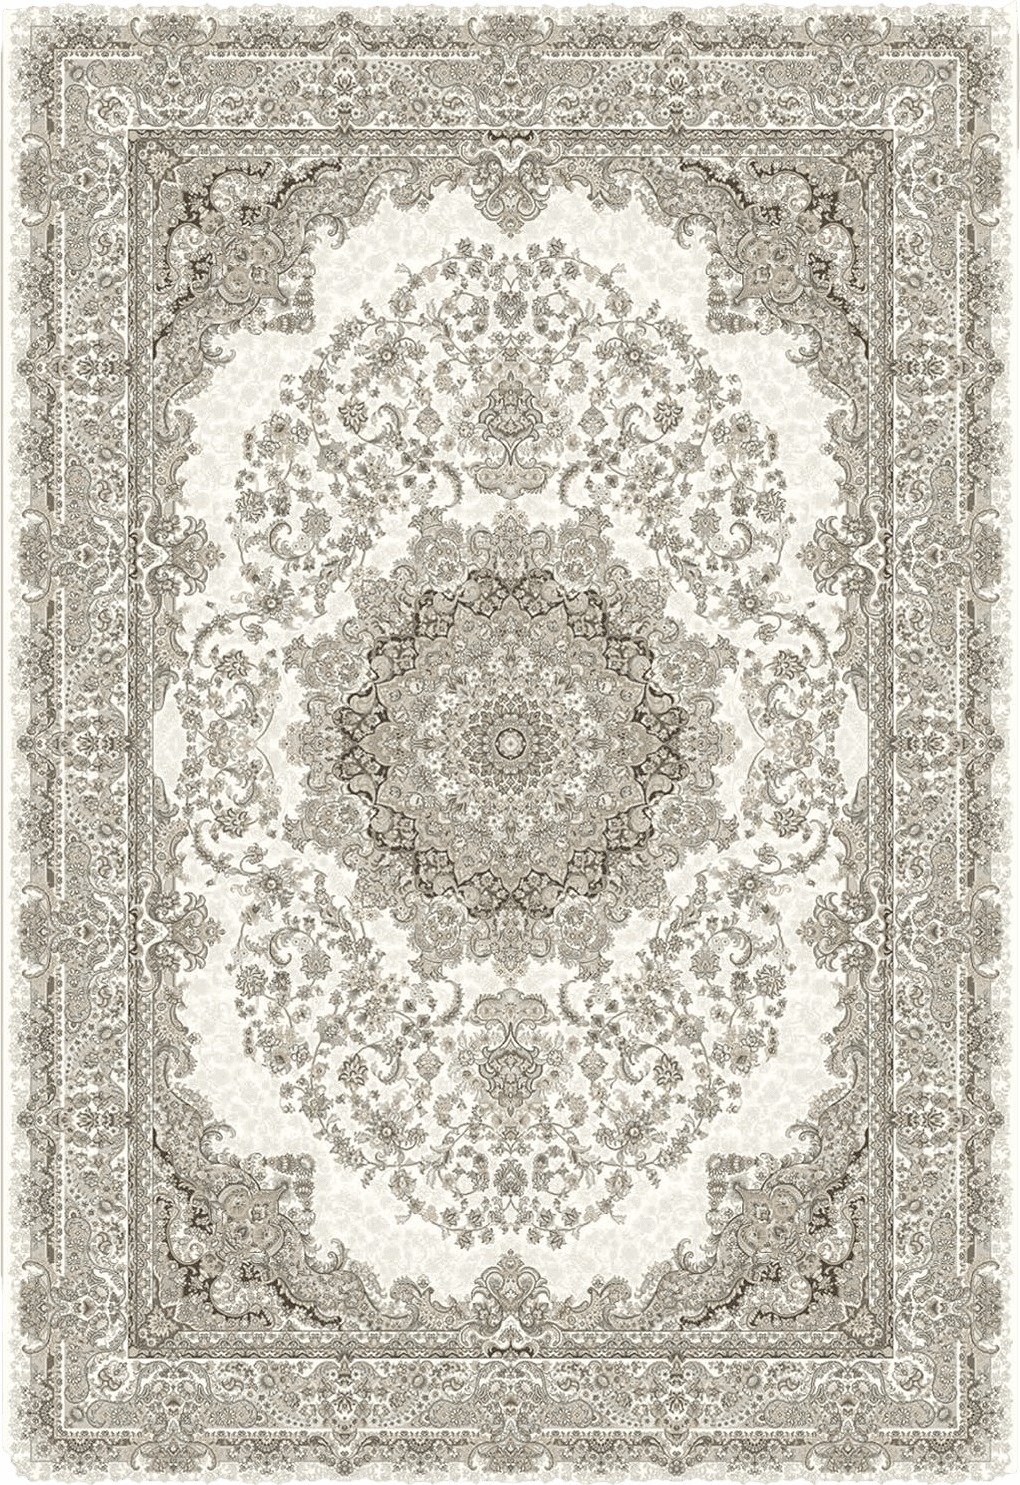 Oriental Area Rug Living Room Rugs: 5x7 Washable Boho Carpet for Bedroom Under Dining Table Large Farmhouse Floral Distressed Indoor Non Slip Decor Home Office Nursery - Beige